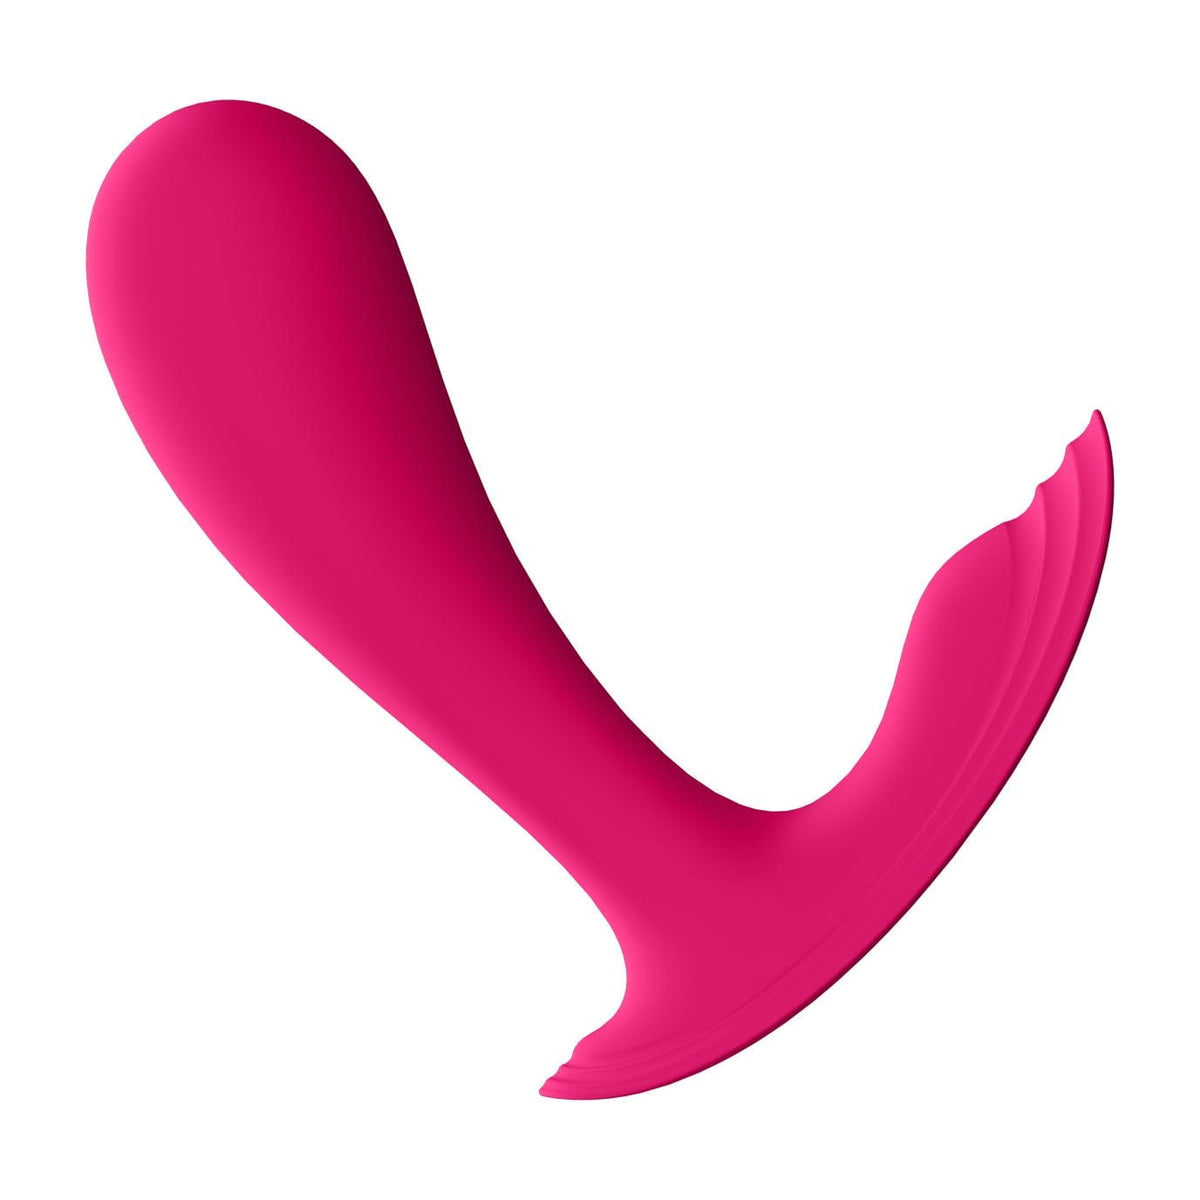 Satisfyer - Top Secret App-Controlled Wearable G-spot Vibrator (Pink) Panties Massager Remote Control (Vibration) Rechargeable 4061504003382 CherryAffairs